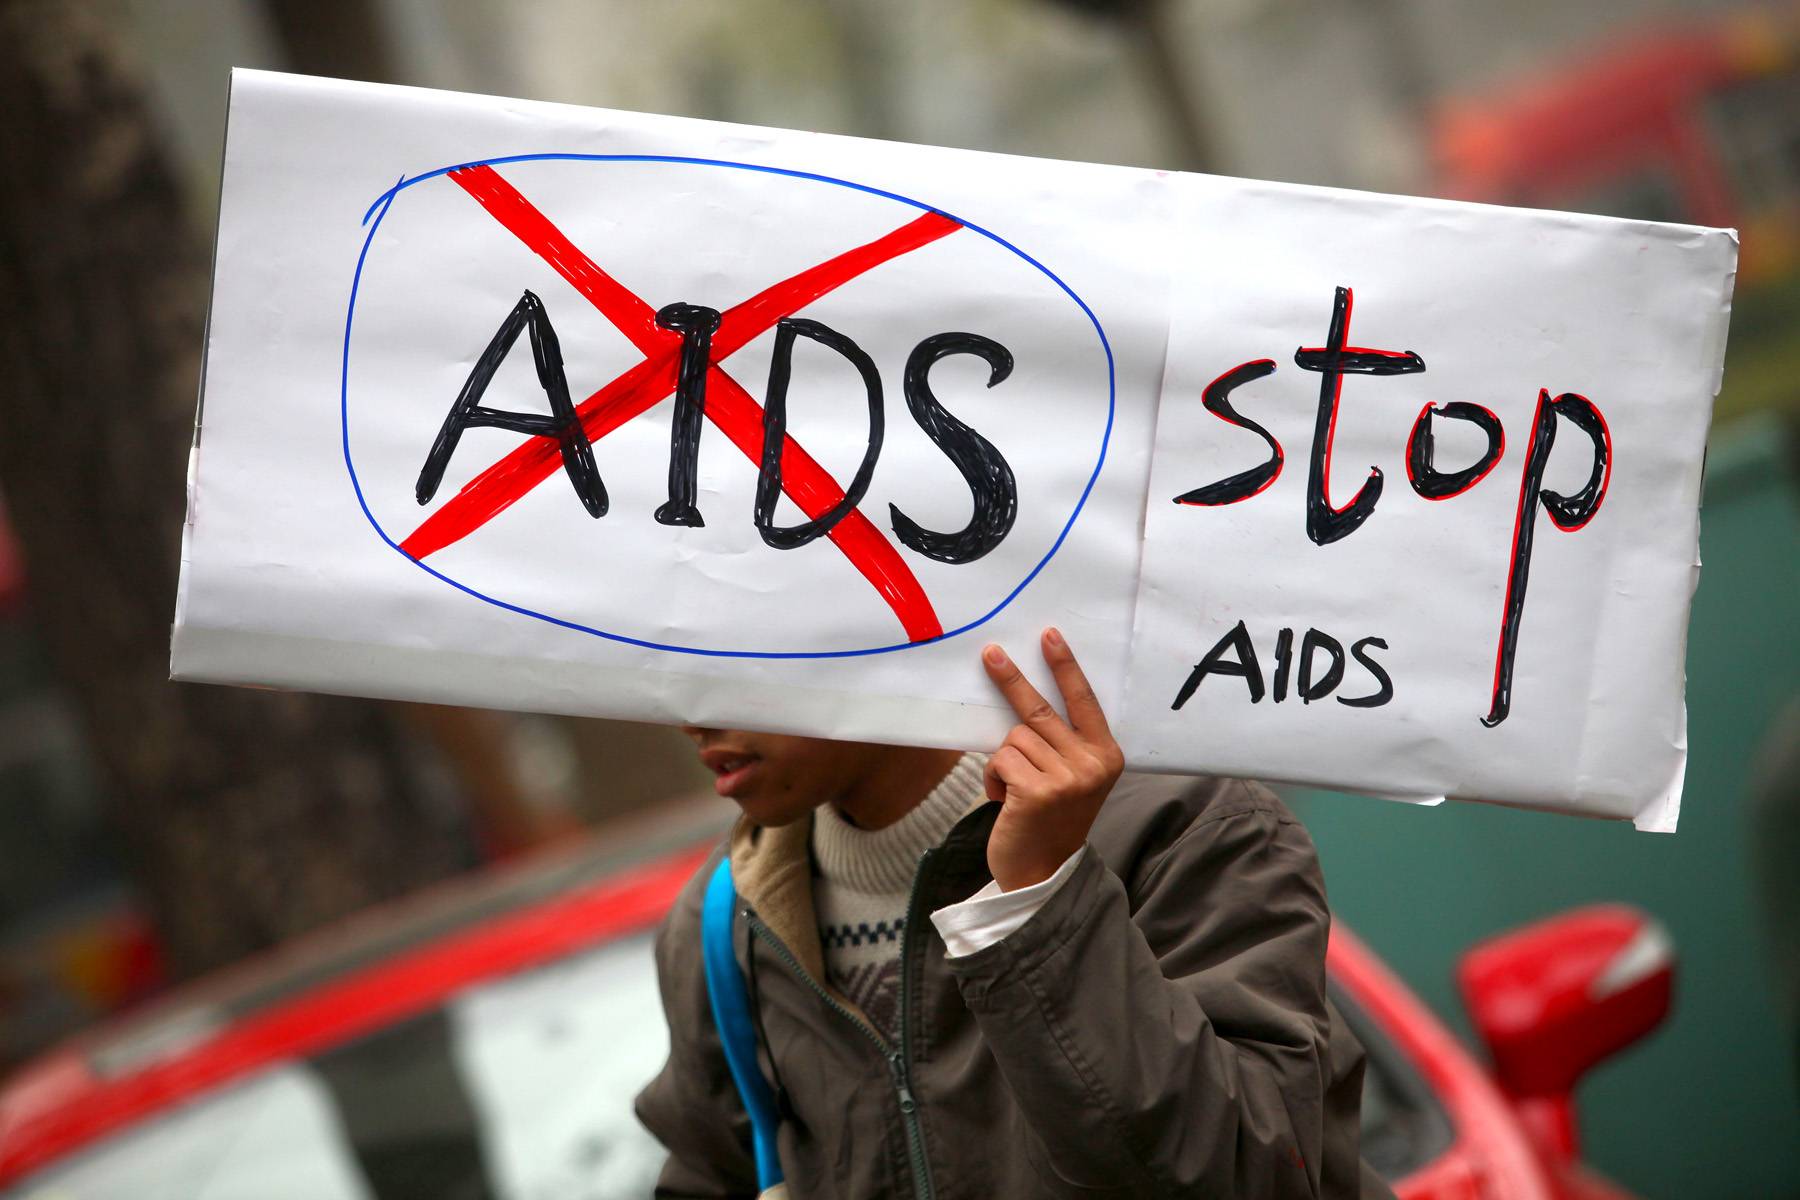 For More Information about HIV/AIDS